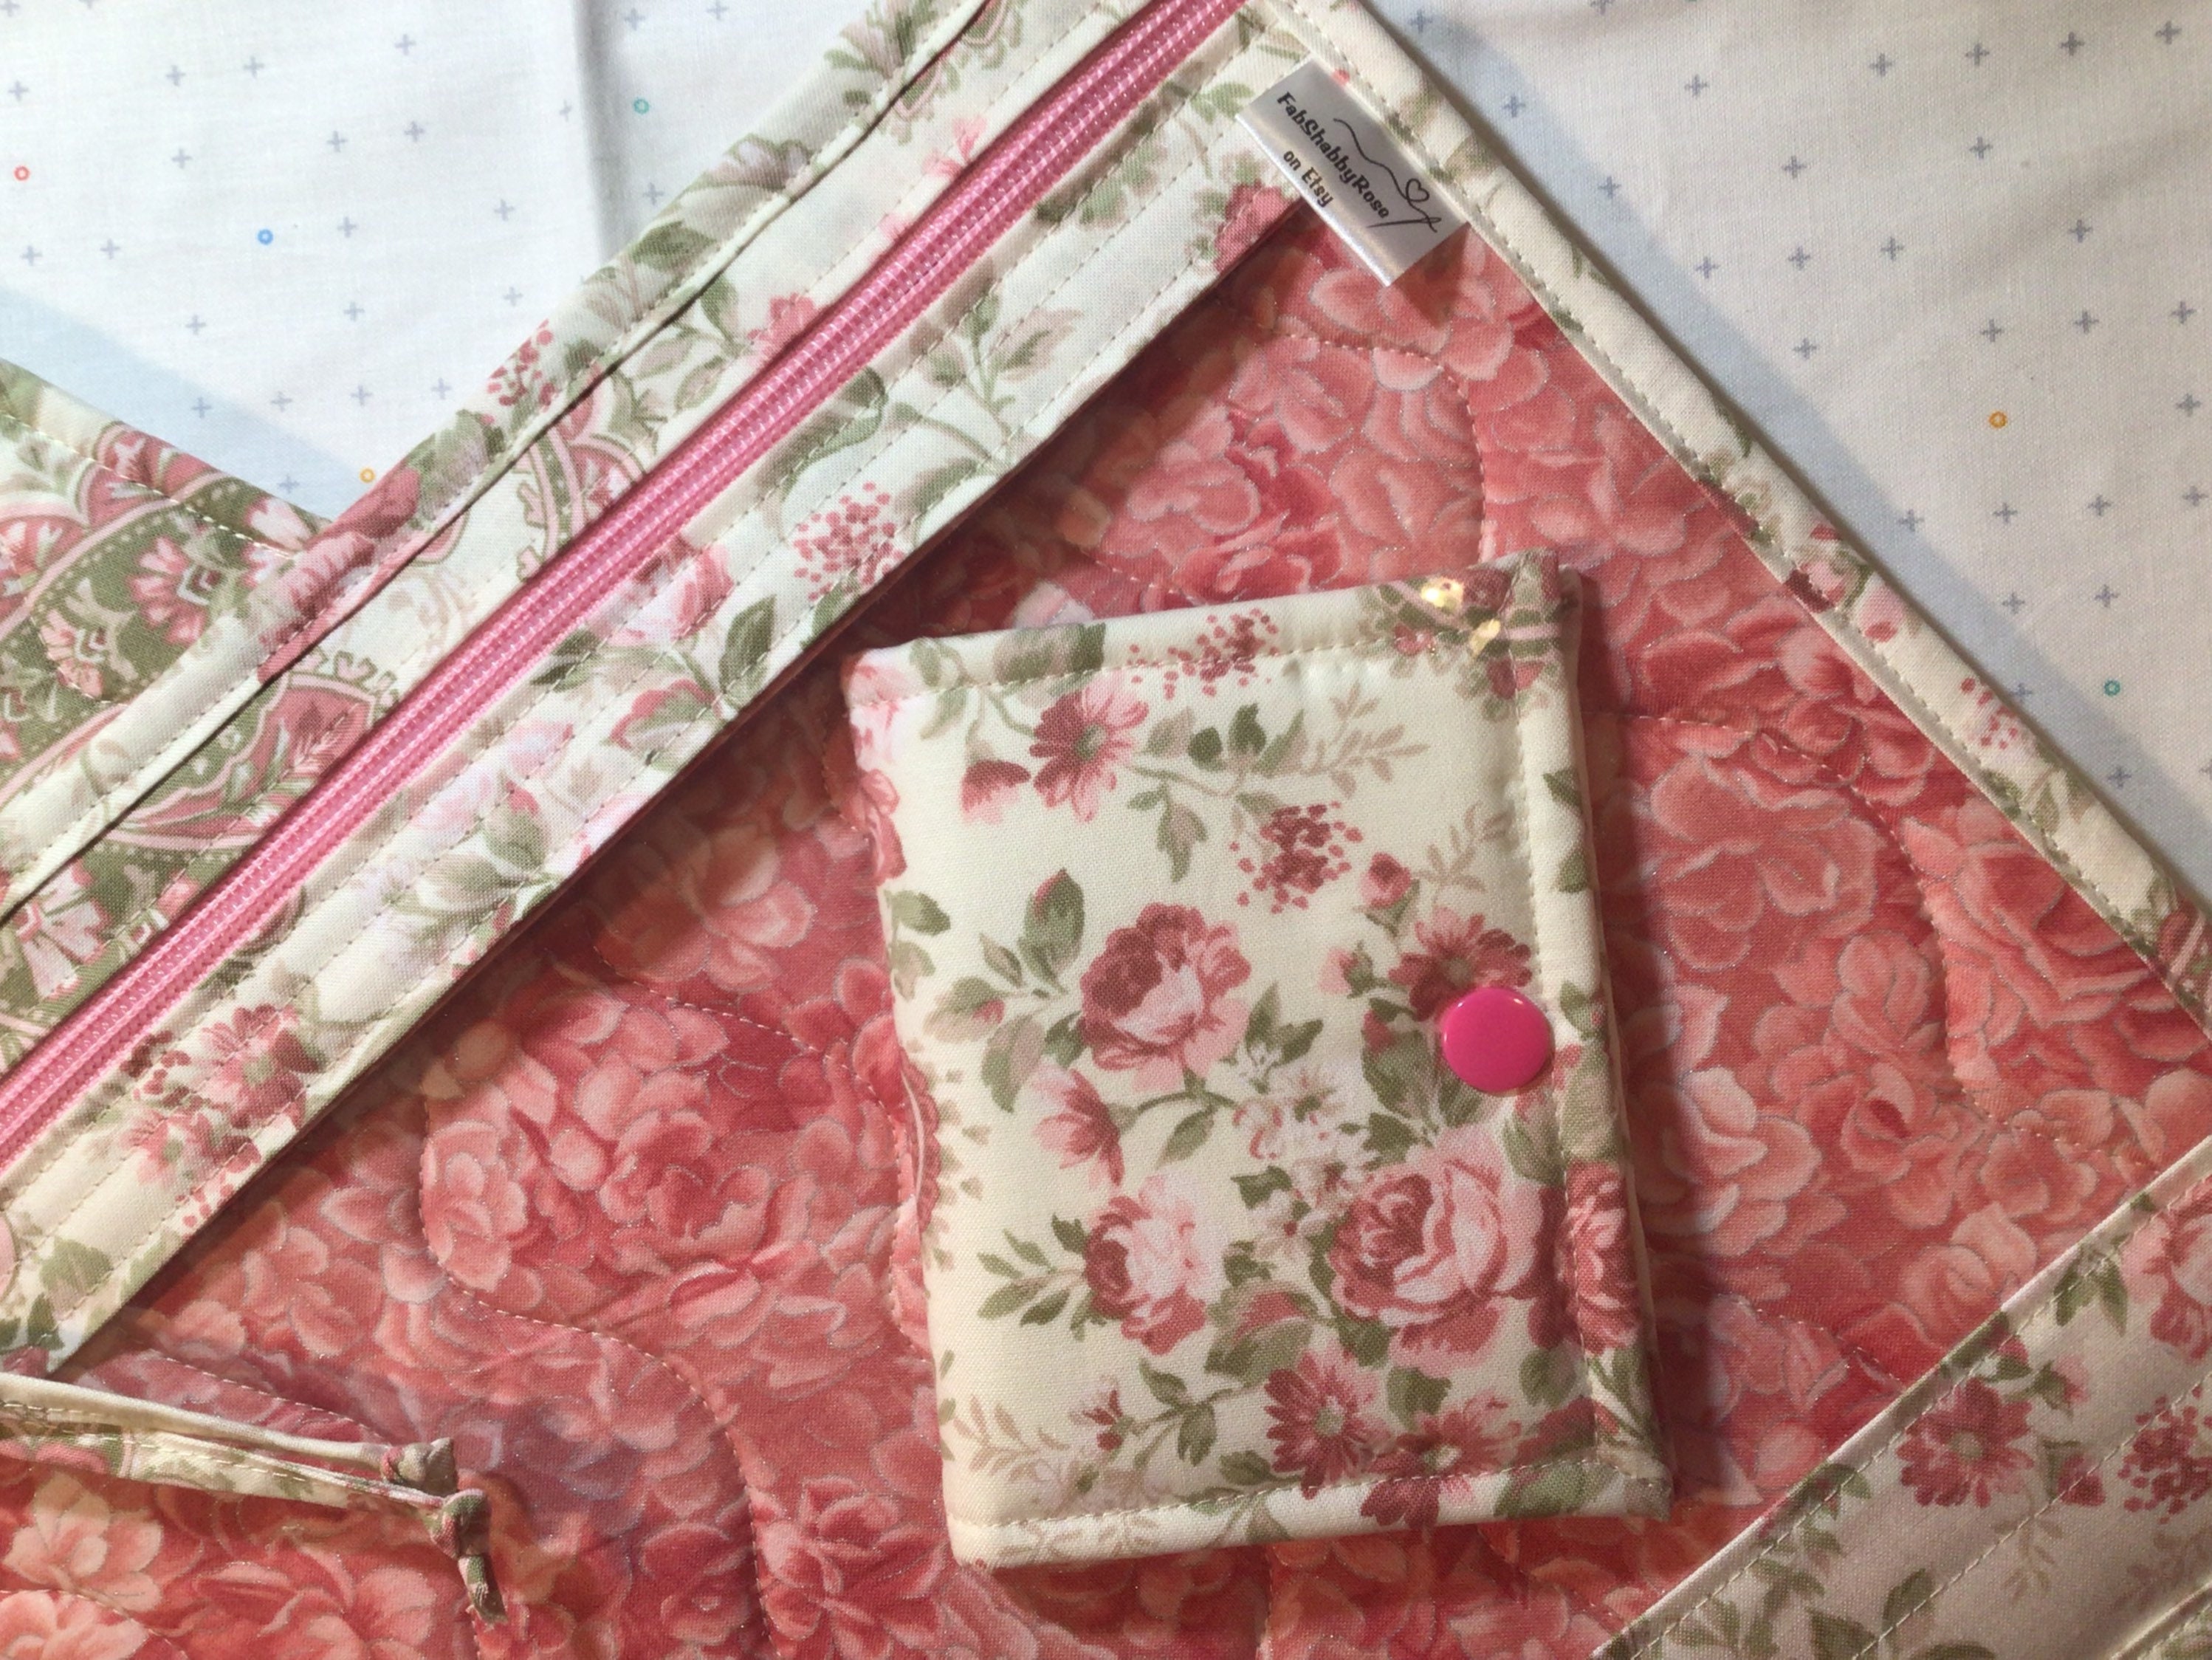 Bestseller! Project Bags for Cross Stitch, Vinyl front project bag for  Cross stitch, Sewing, Quilting, and Crafts. Lavender Tea Party